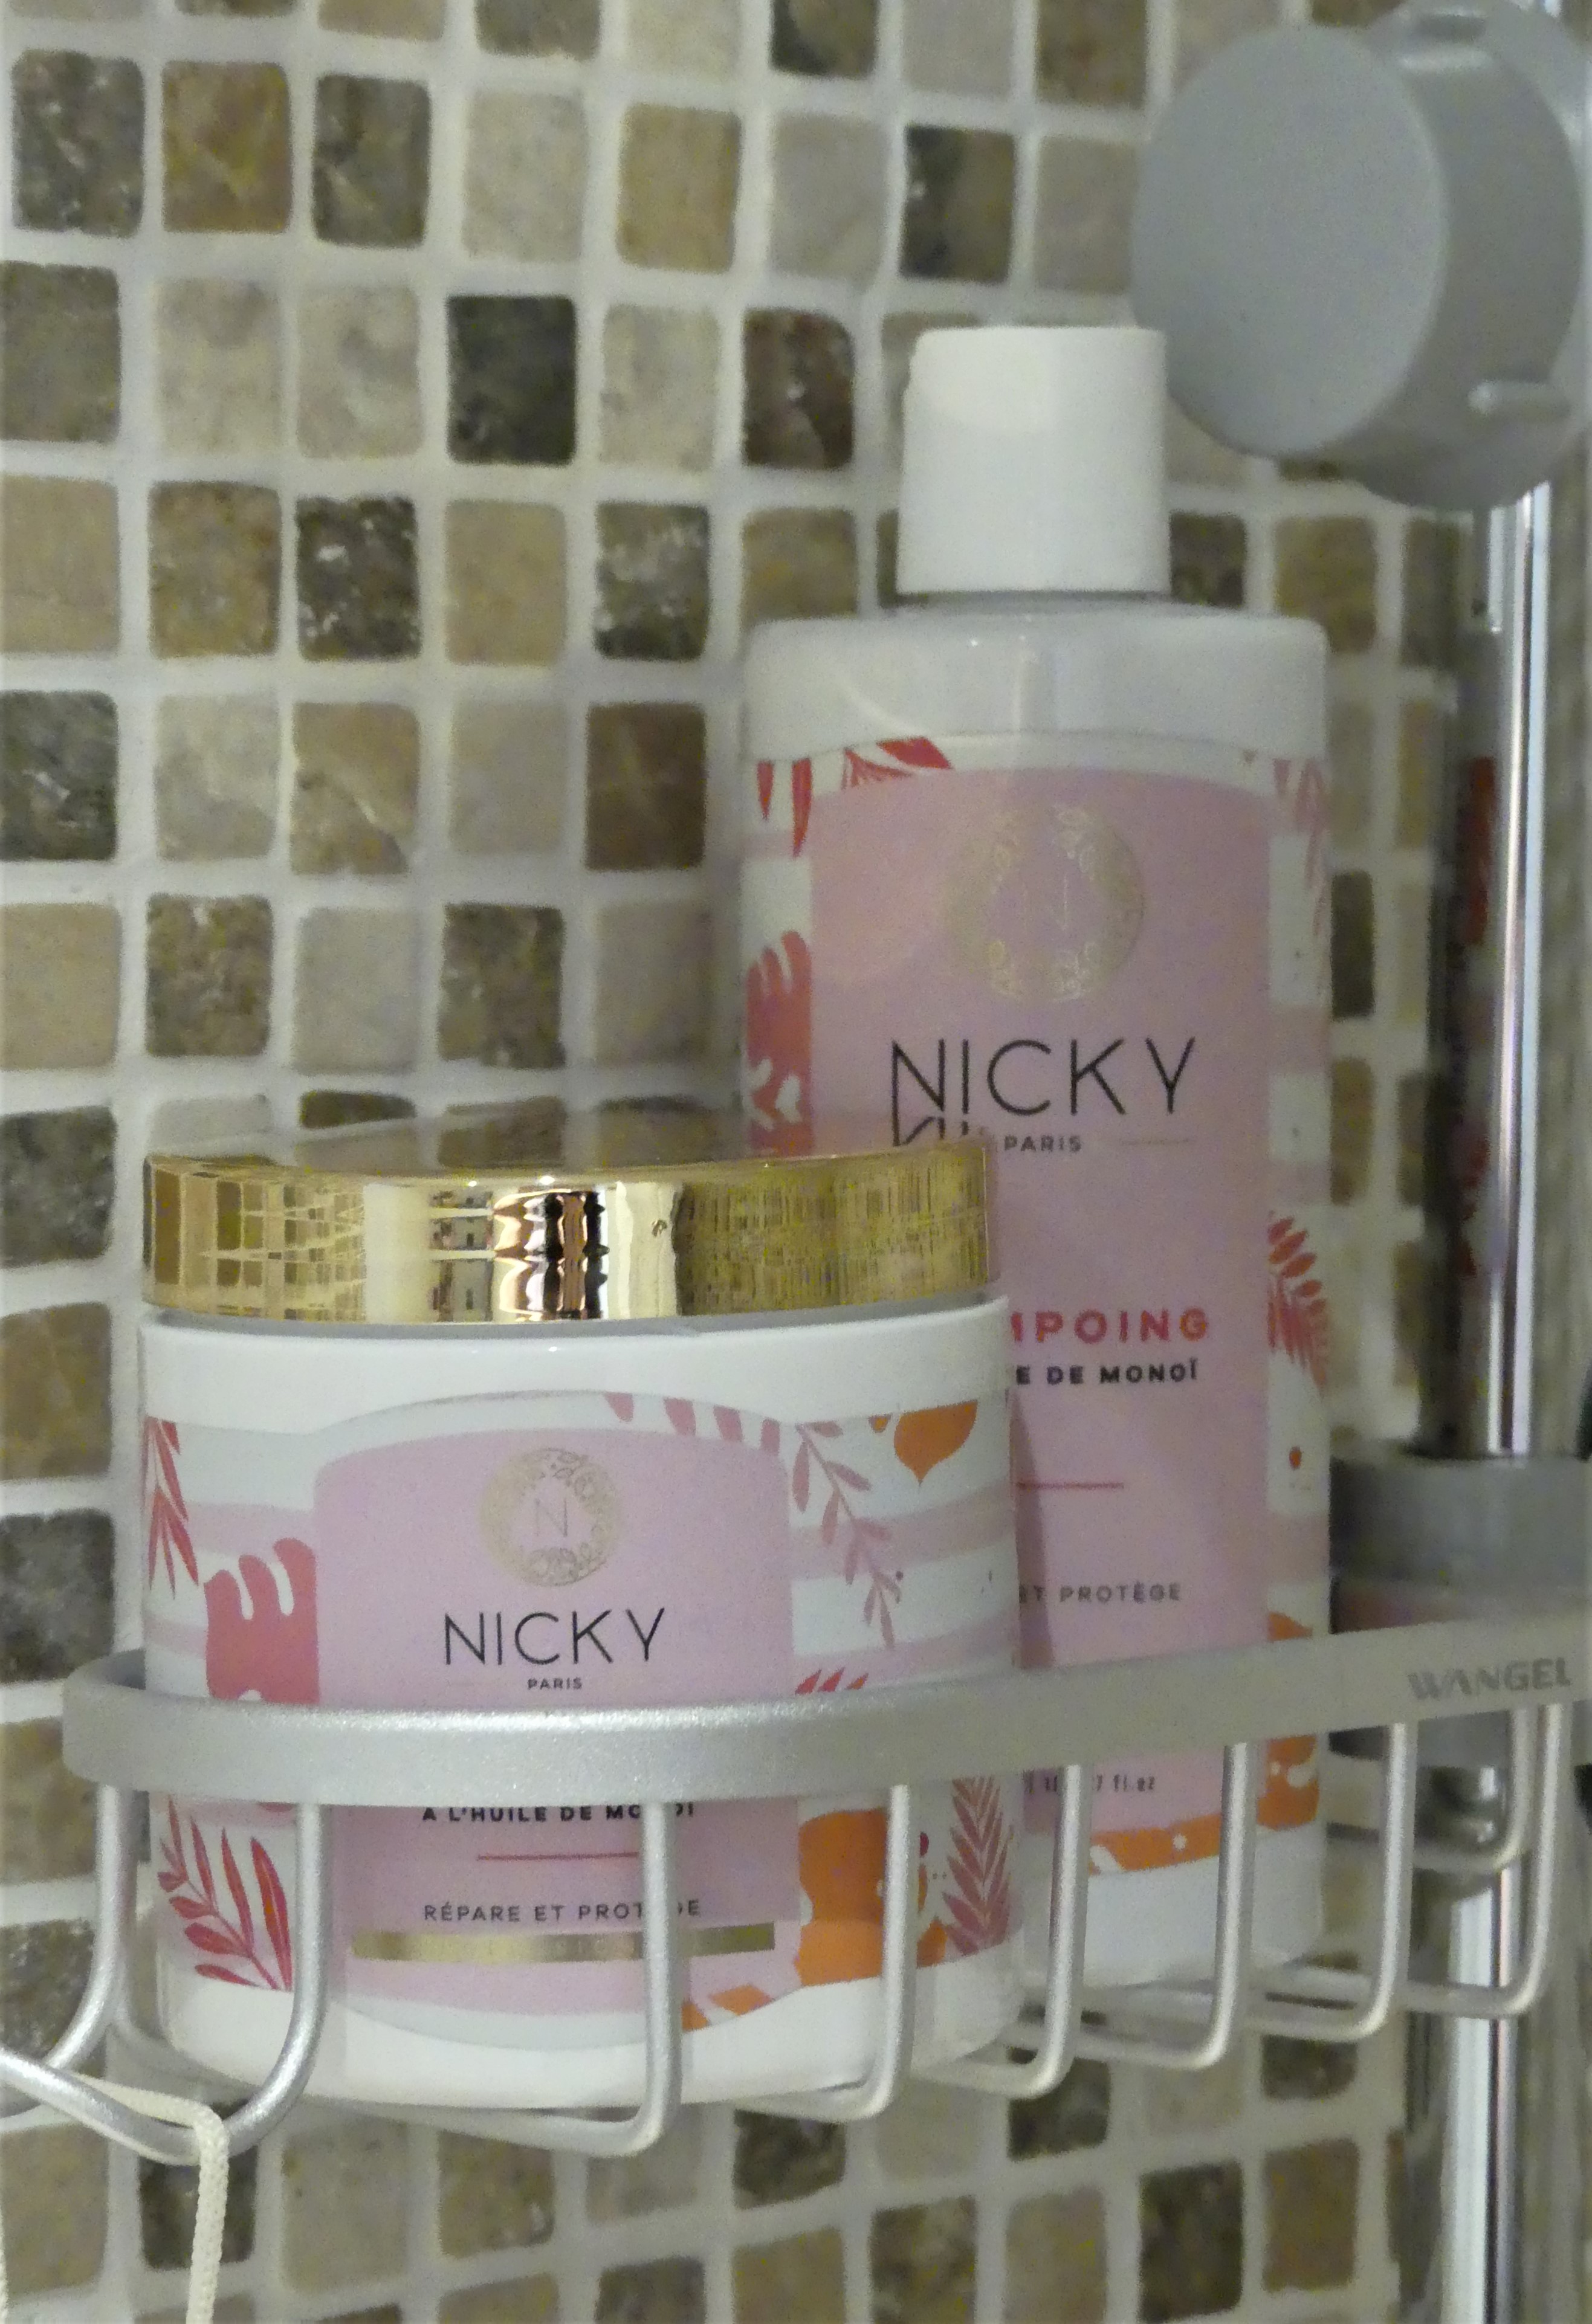 Gamme capillaire Nicky Paris